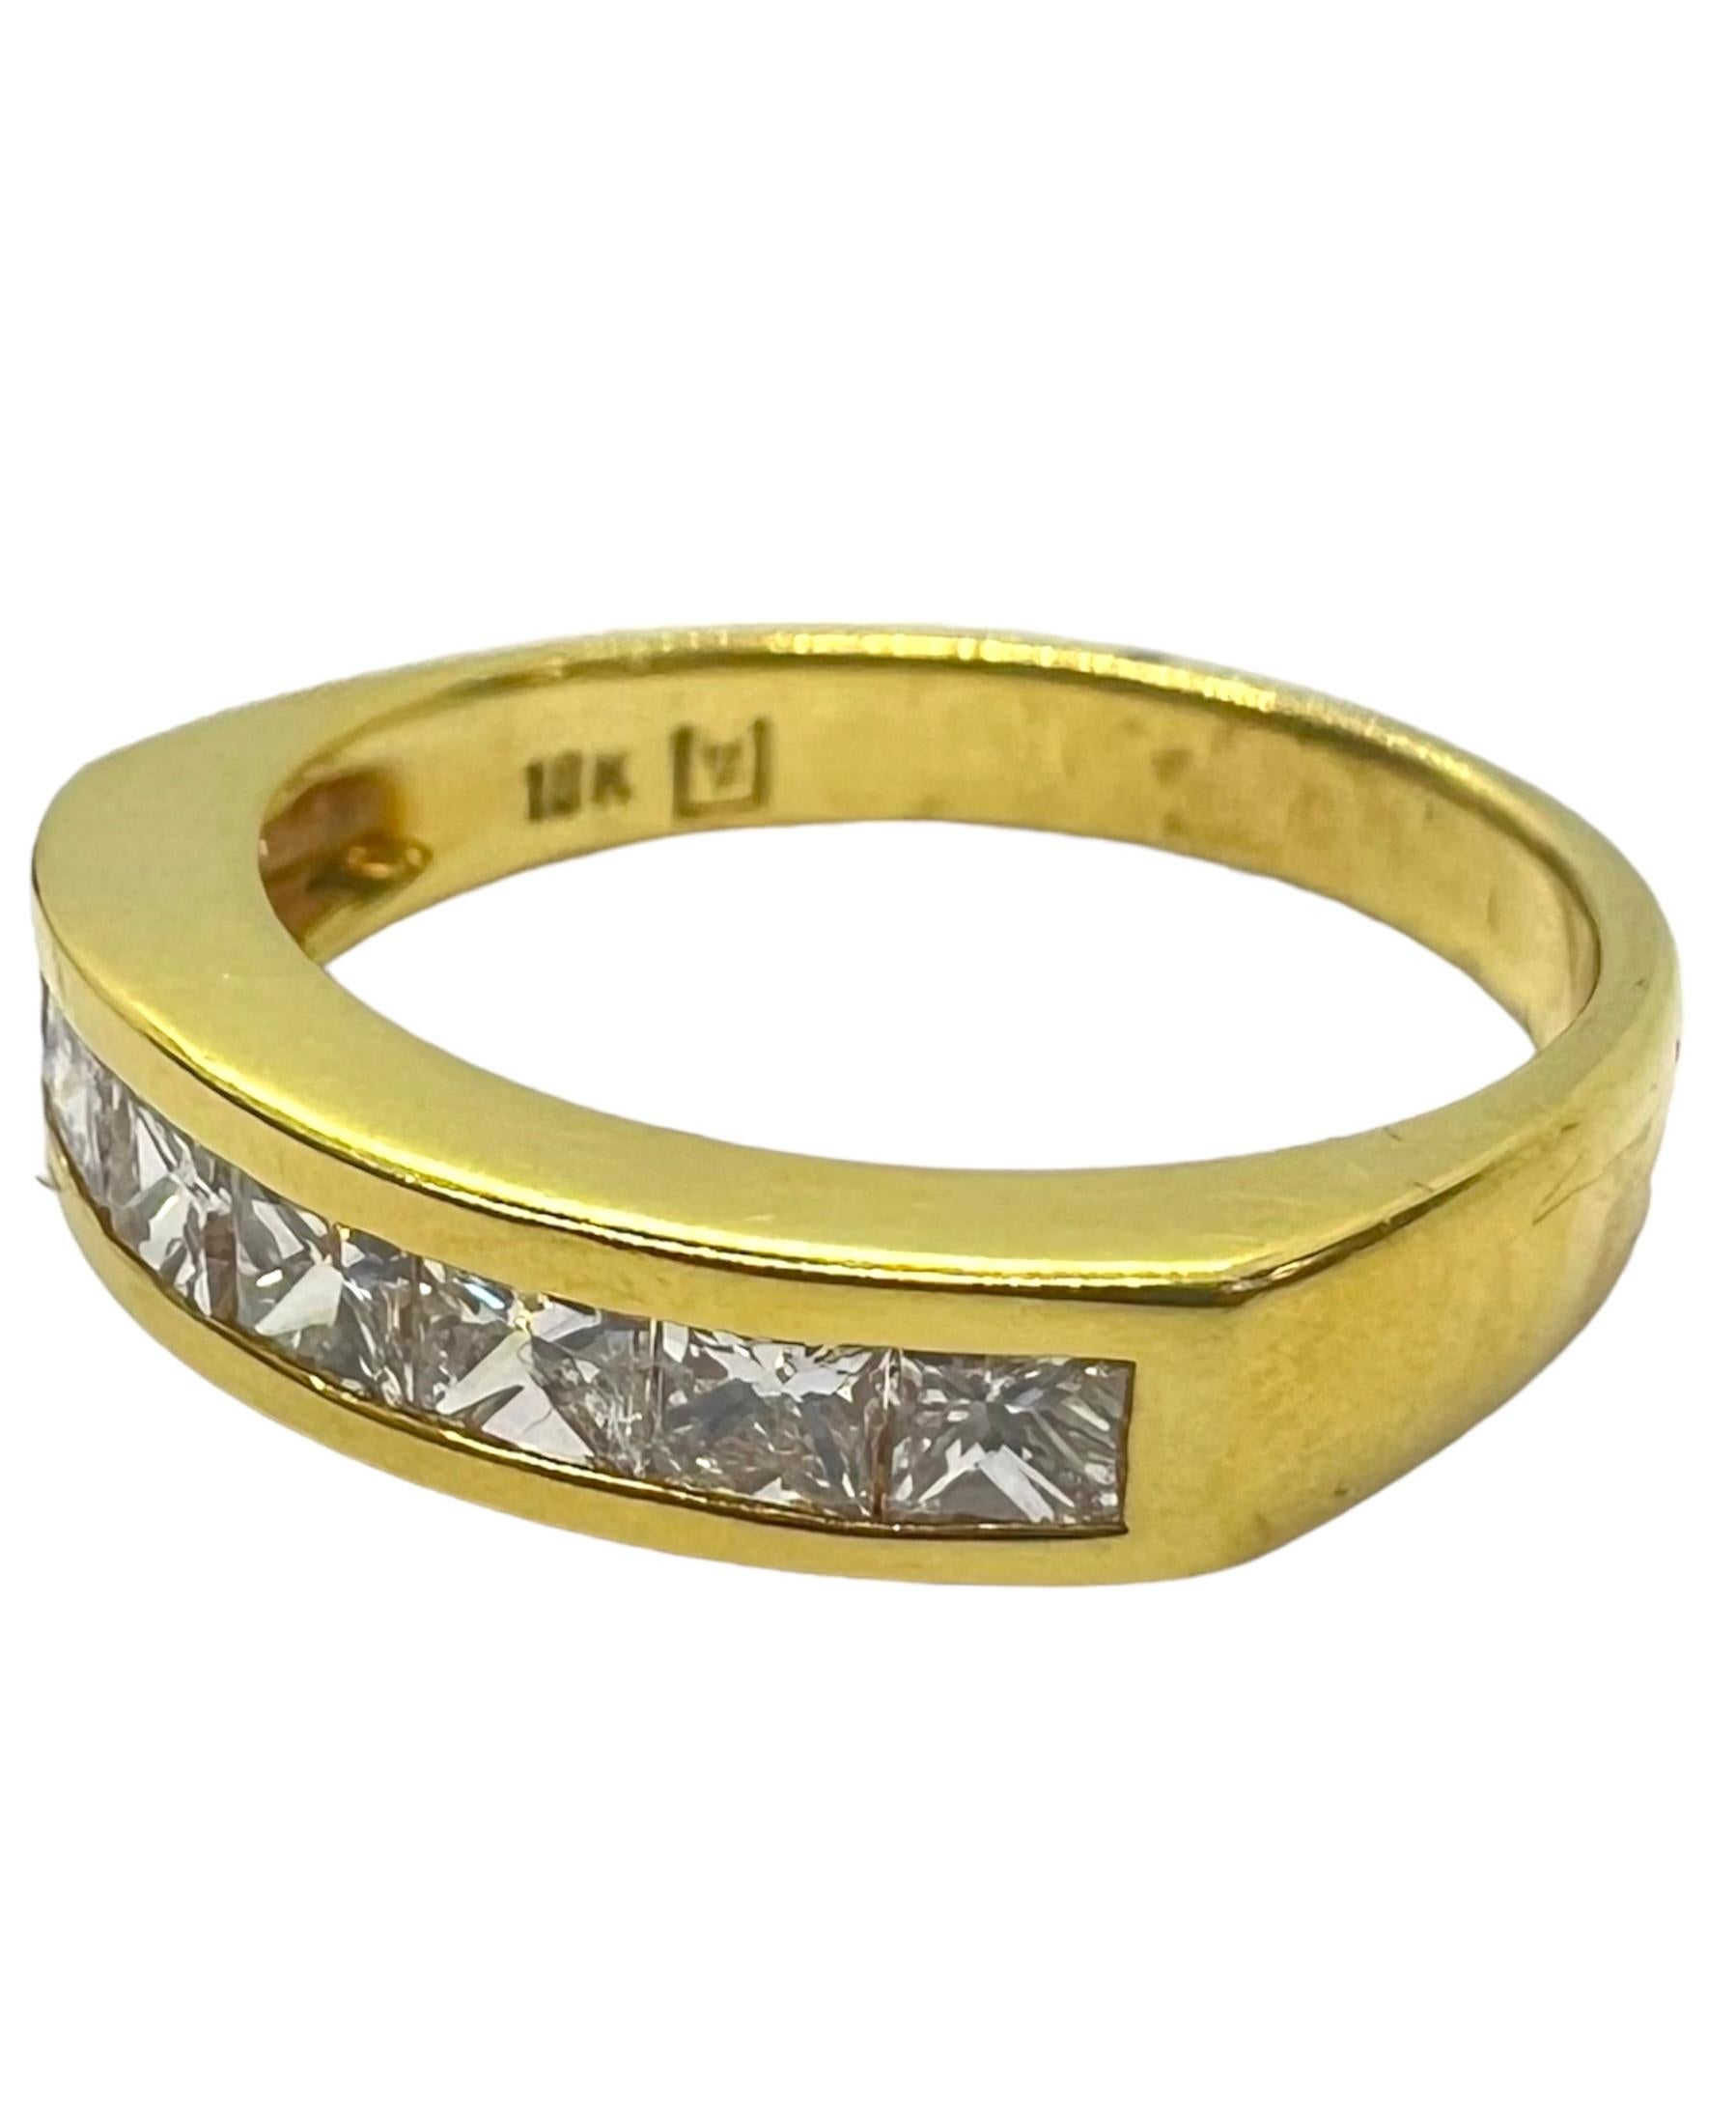 18K yellow gold ring with square cut diamonds.

Sophia D by Joseph Dardashti LTD has been known worldwide for 35 years and are inspired by classic Art Deco design that merges with modern manufacturing techniques.